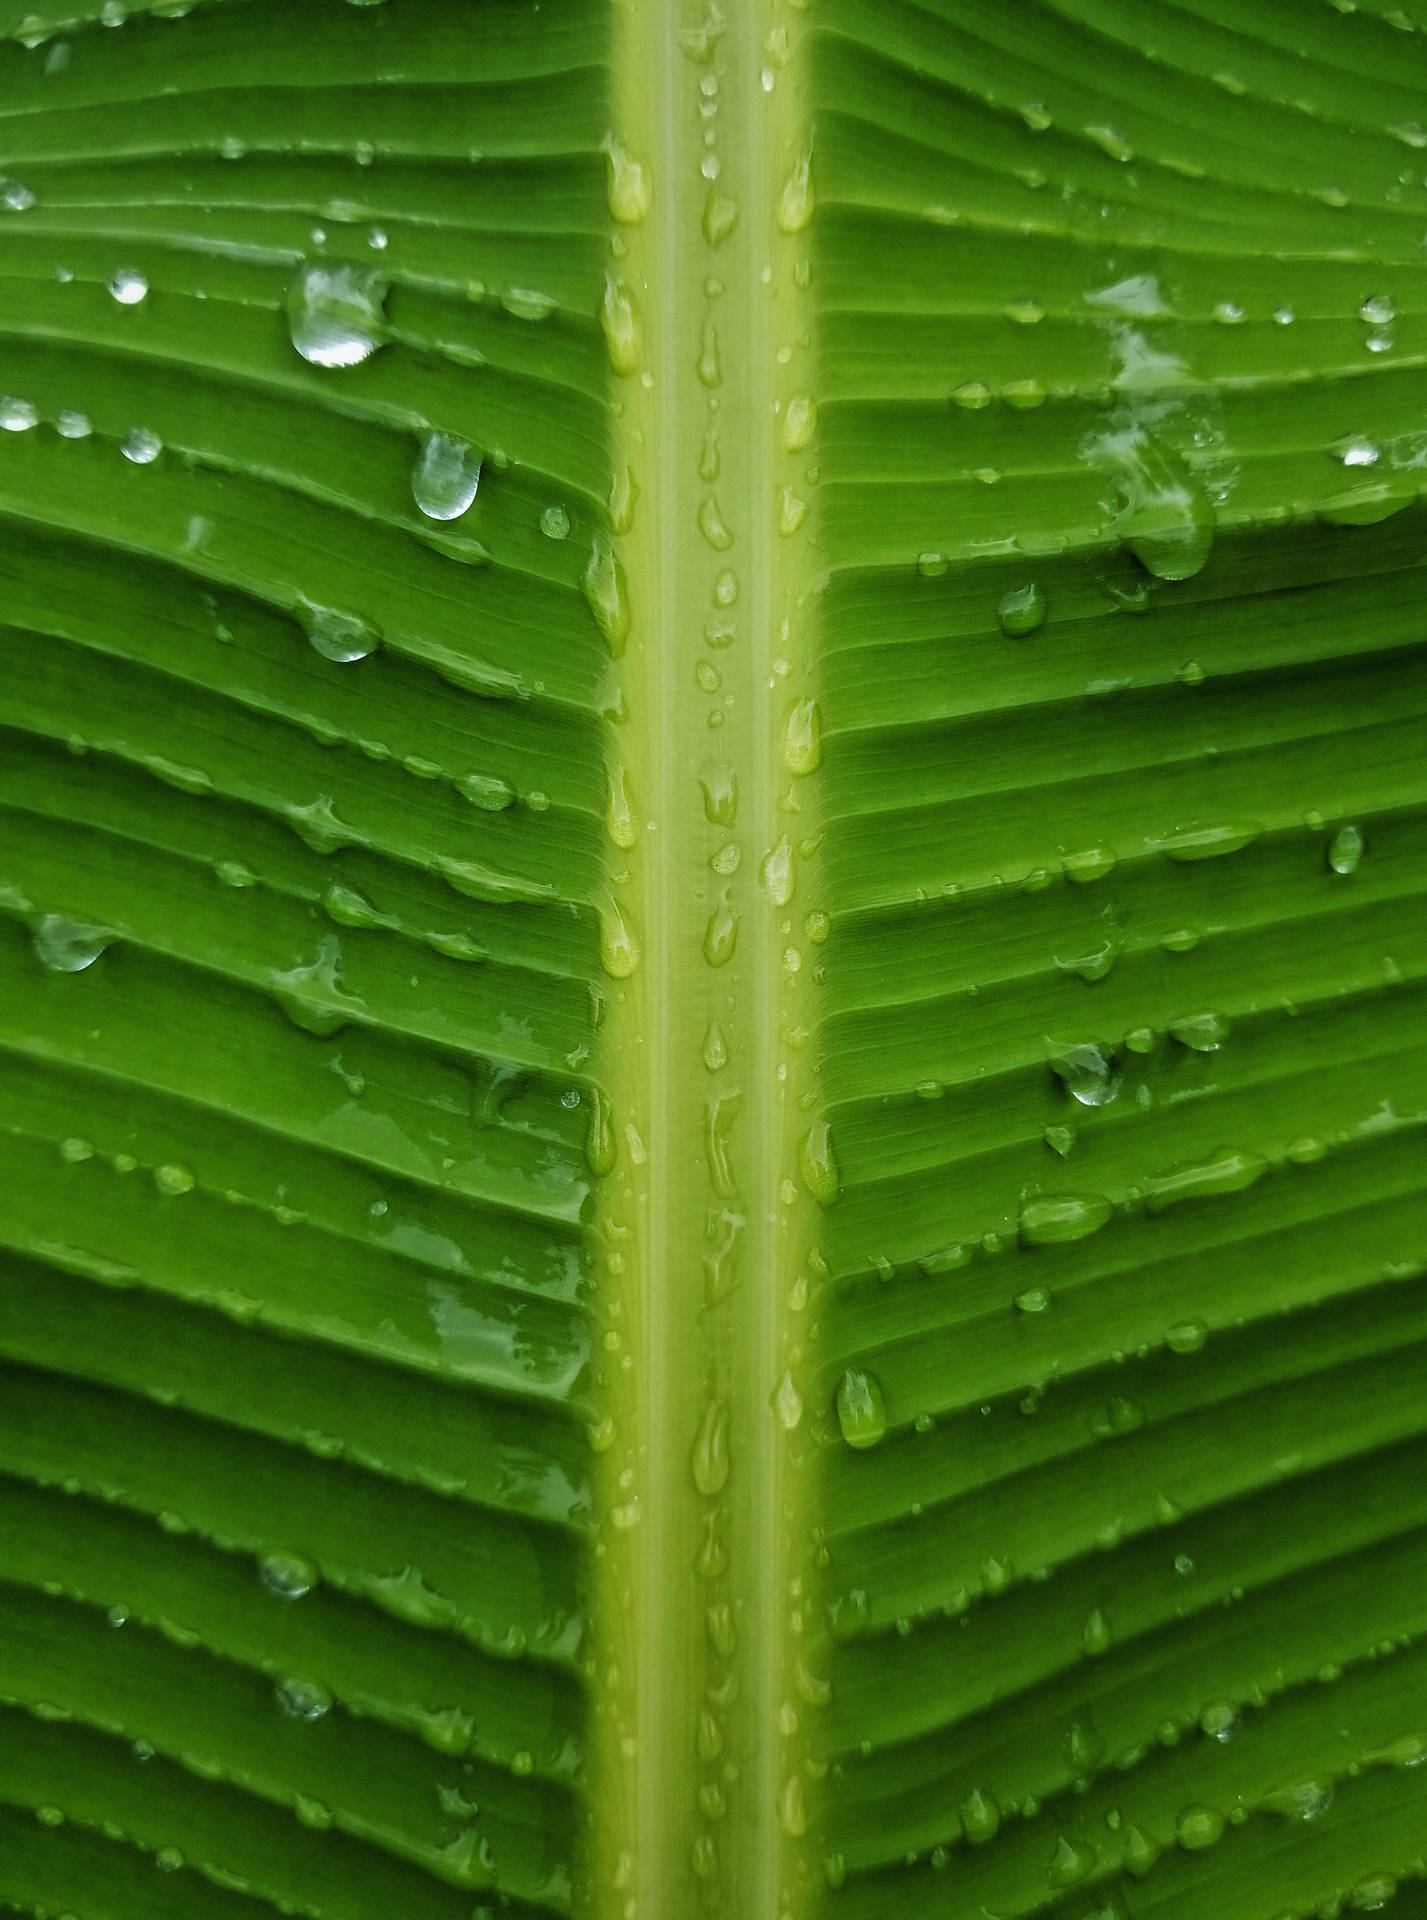 Banana Leaf 2996X4032 Wallpaper and Background Image